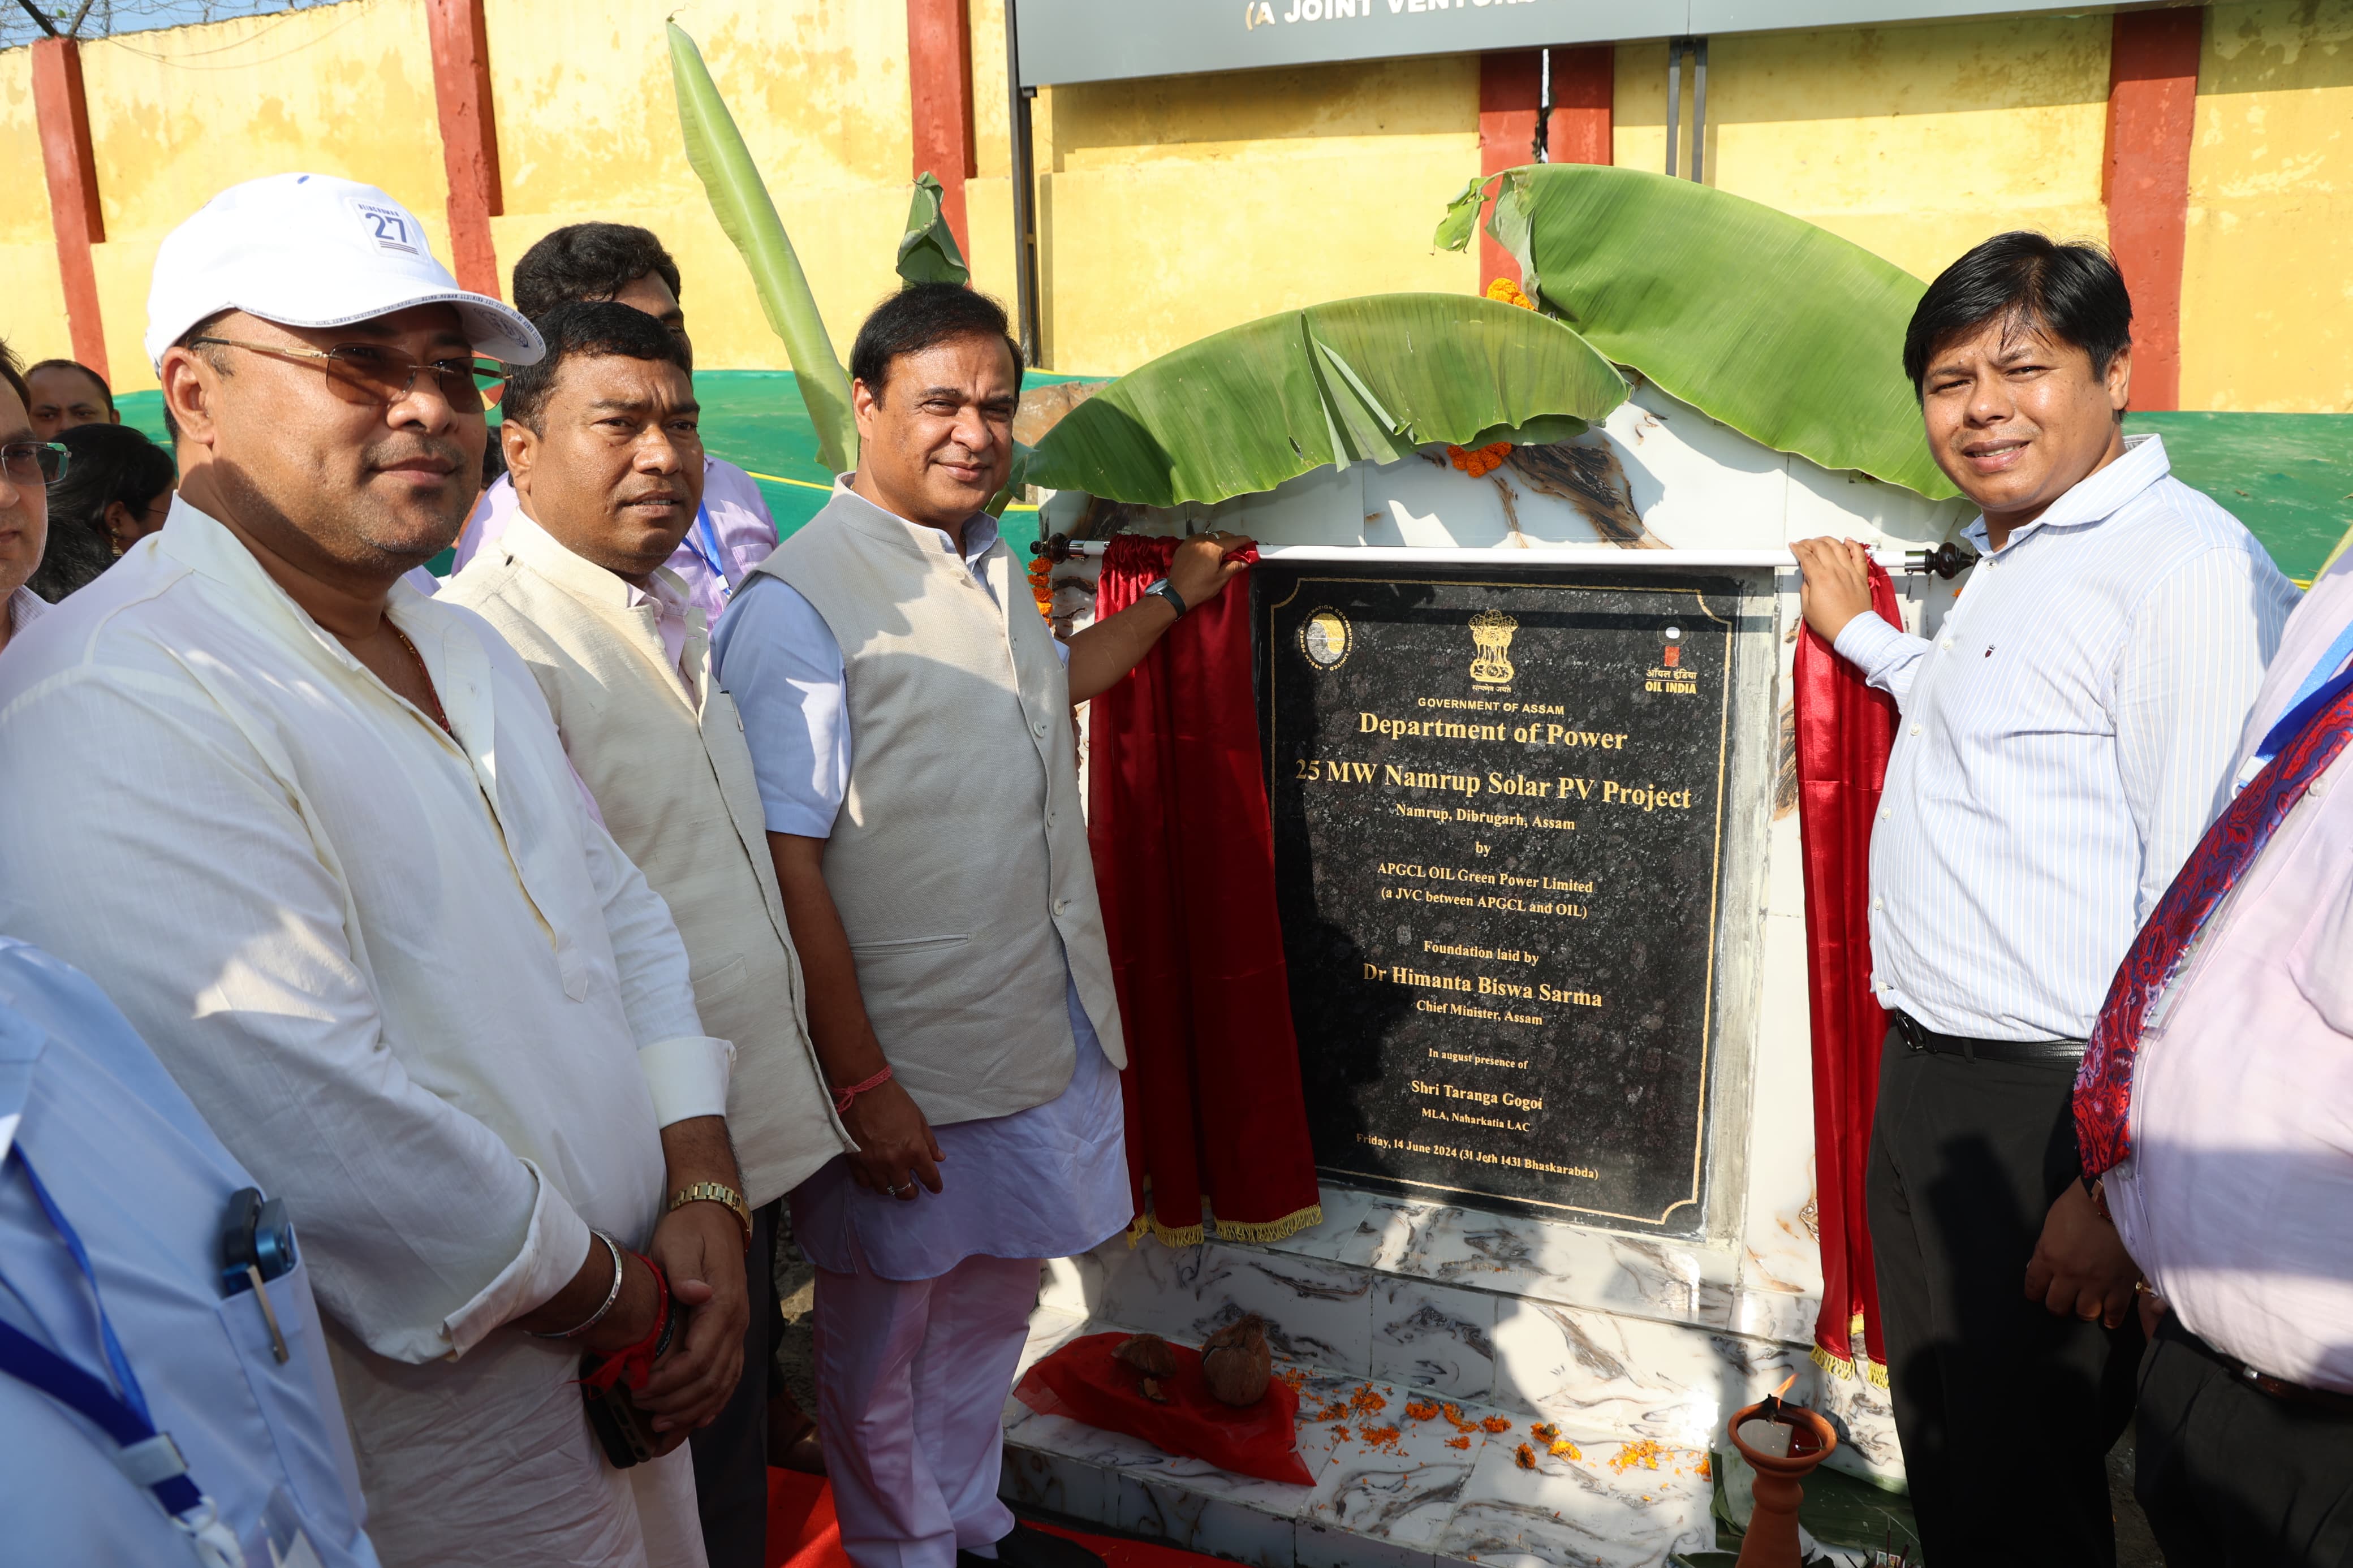 Laid the foundation stone of a 25MW Solar Power Plant at Namrup in Dibrugarh today